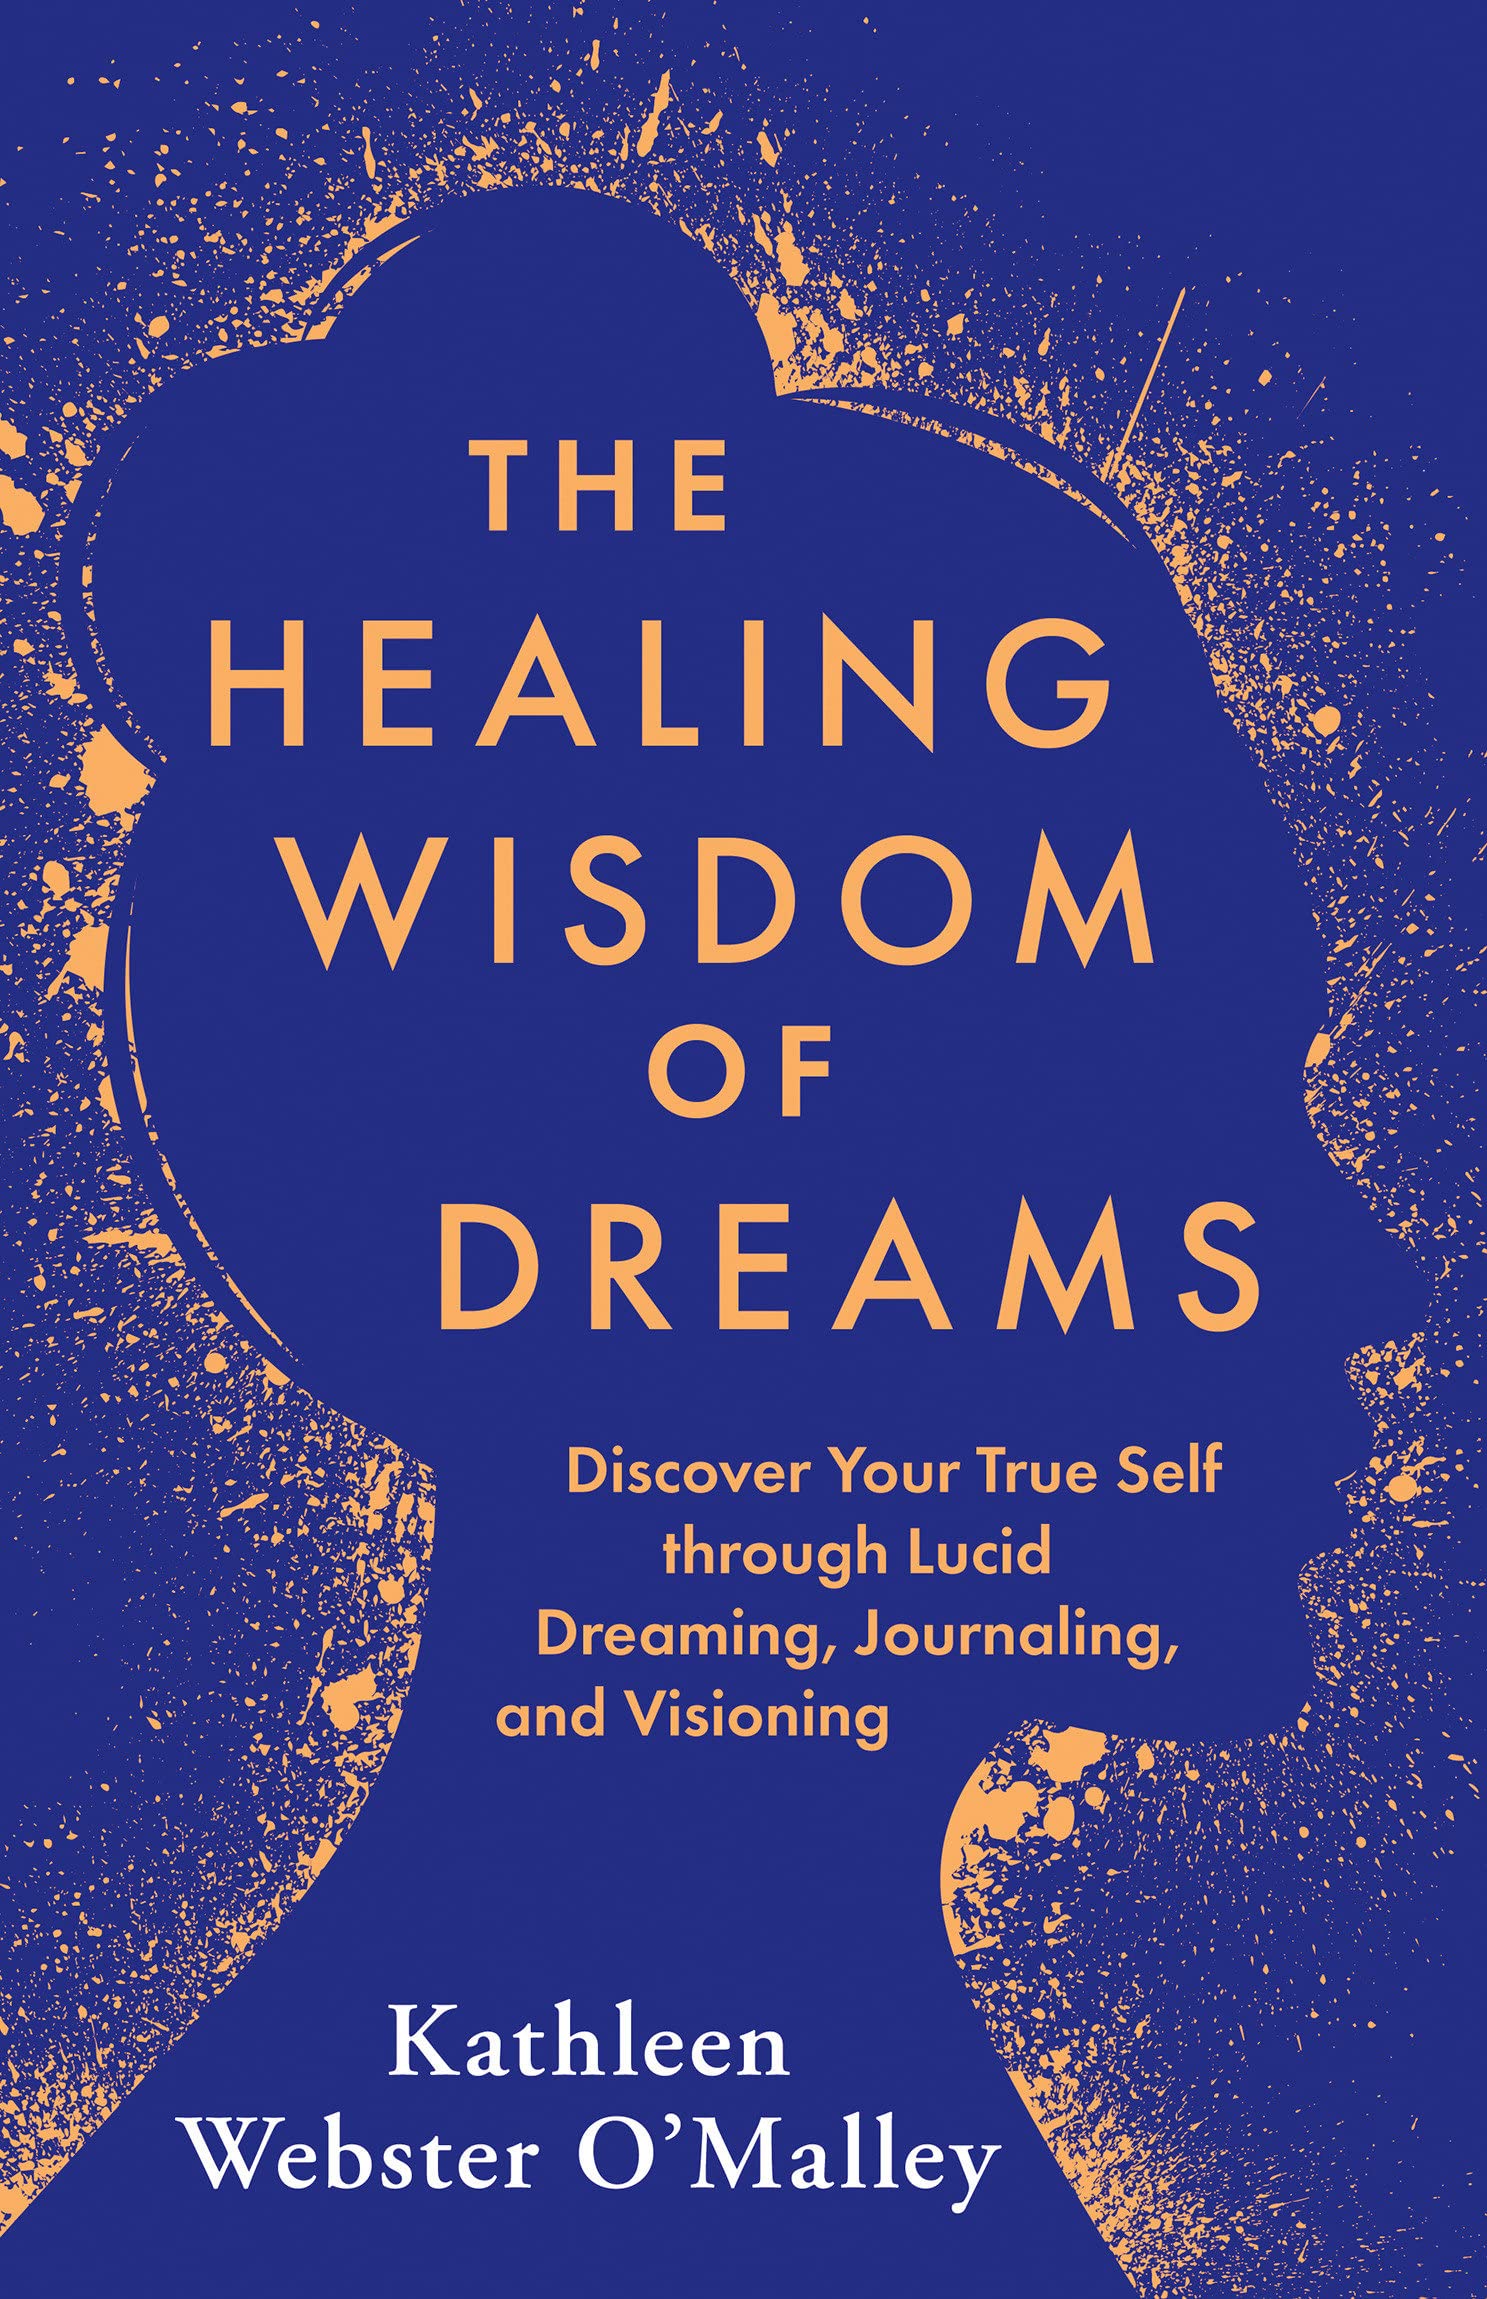 The Healing Wisdom of Dreams: Discover Your True Self through Lucid Dreaming, Journaling, and Visioning